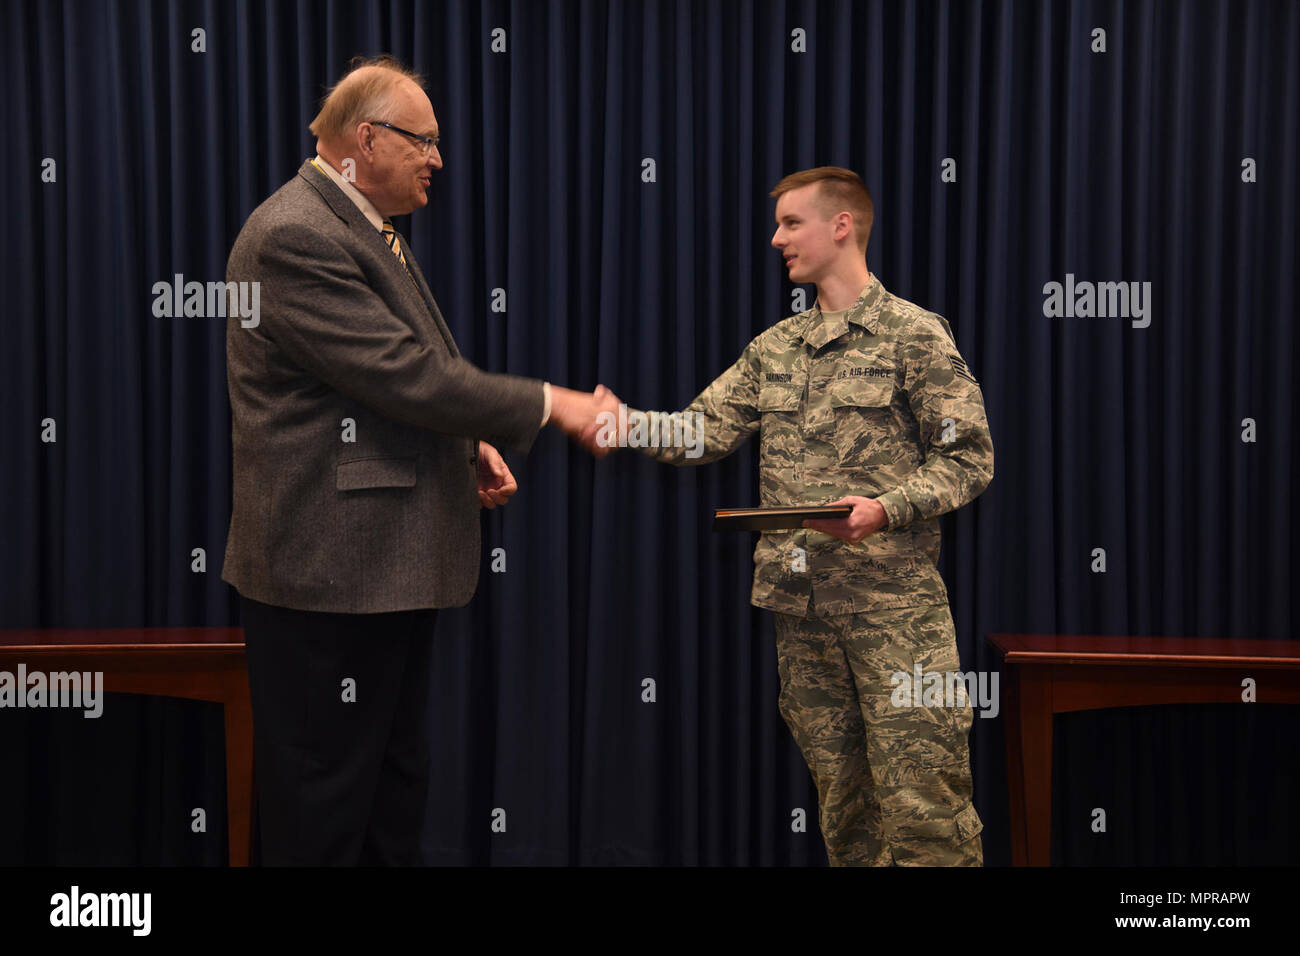 Sioux Falls, S.D. - Staff Sgt. Zac Hakinson, 114th Communication Flight information technology specialist, receives his collage diploma from Dr. Richard Hanson, Dakota State Univeristy Provost and Vice President for Academic Affairs, April 11, 2017, Joe Foss Field, S.D. Hakinson recieved his diploma prior to deploying for a Reserve Component Period. Stock Photo